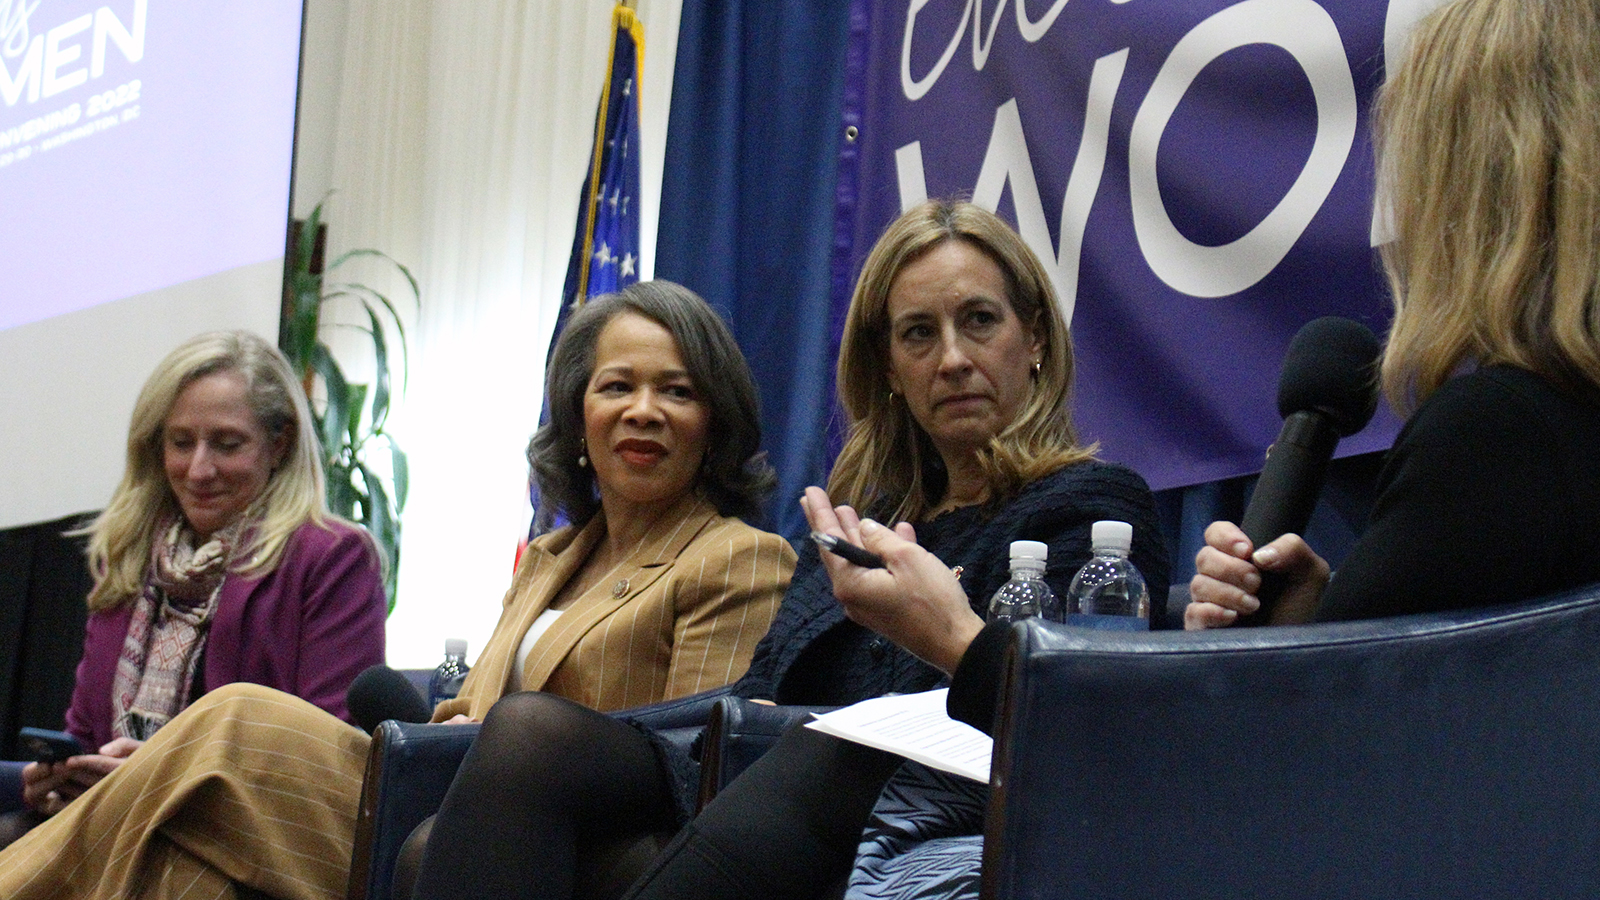 Reps. Abigail Spanberger (VA-7), Lisa Blunt Rochester (DE-AL) and Mikie Sherrill (NJ-11) speak at the 2022 Electing Women Convening.